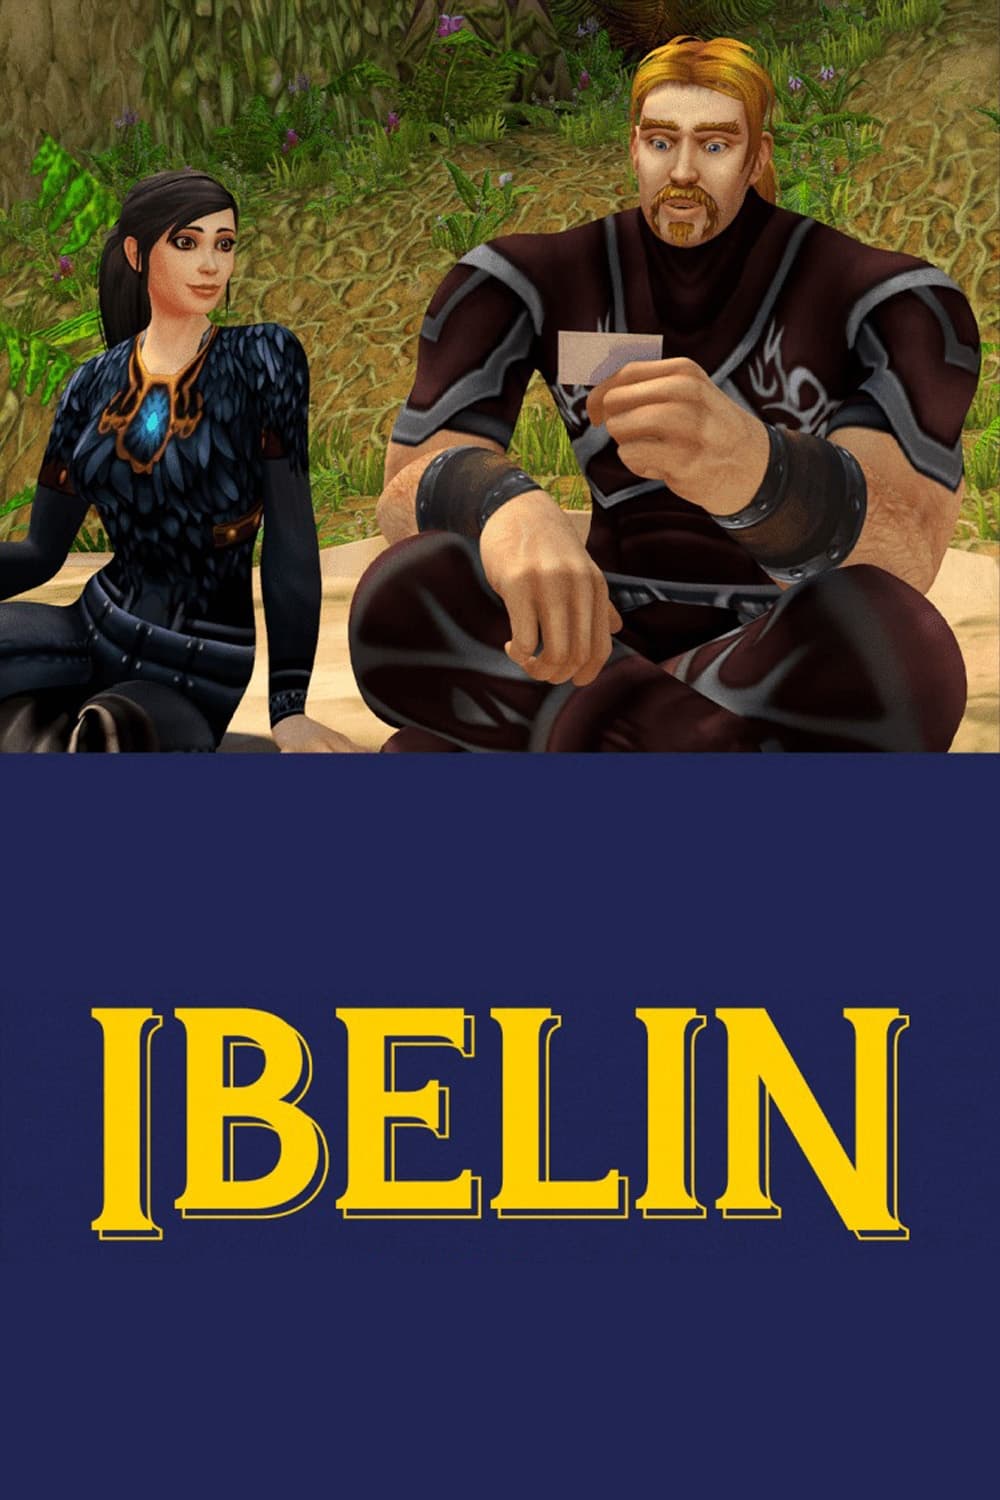 The Remarkable Life of Ibelin